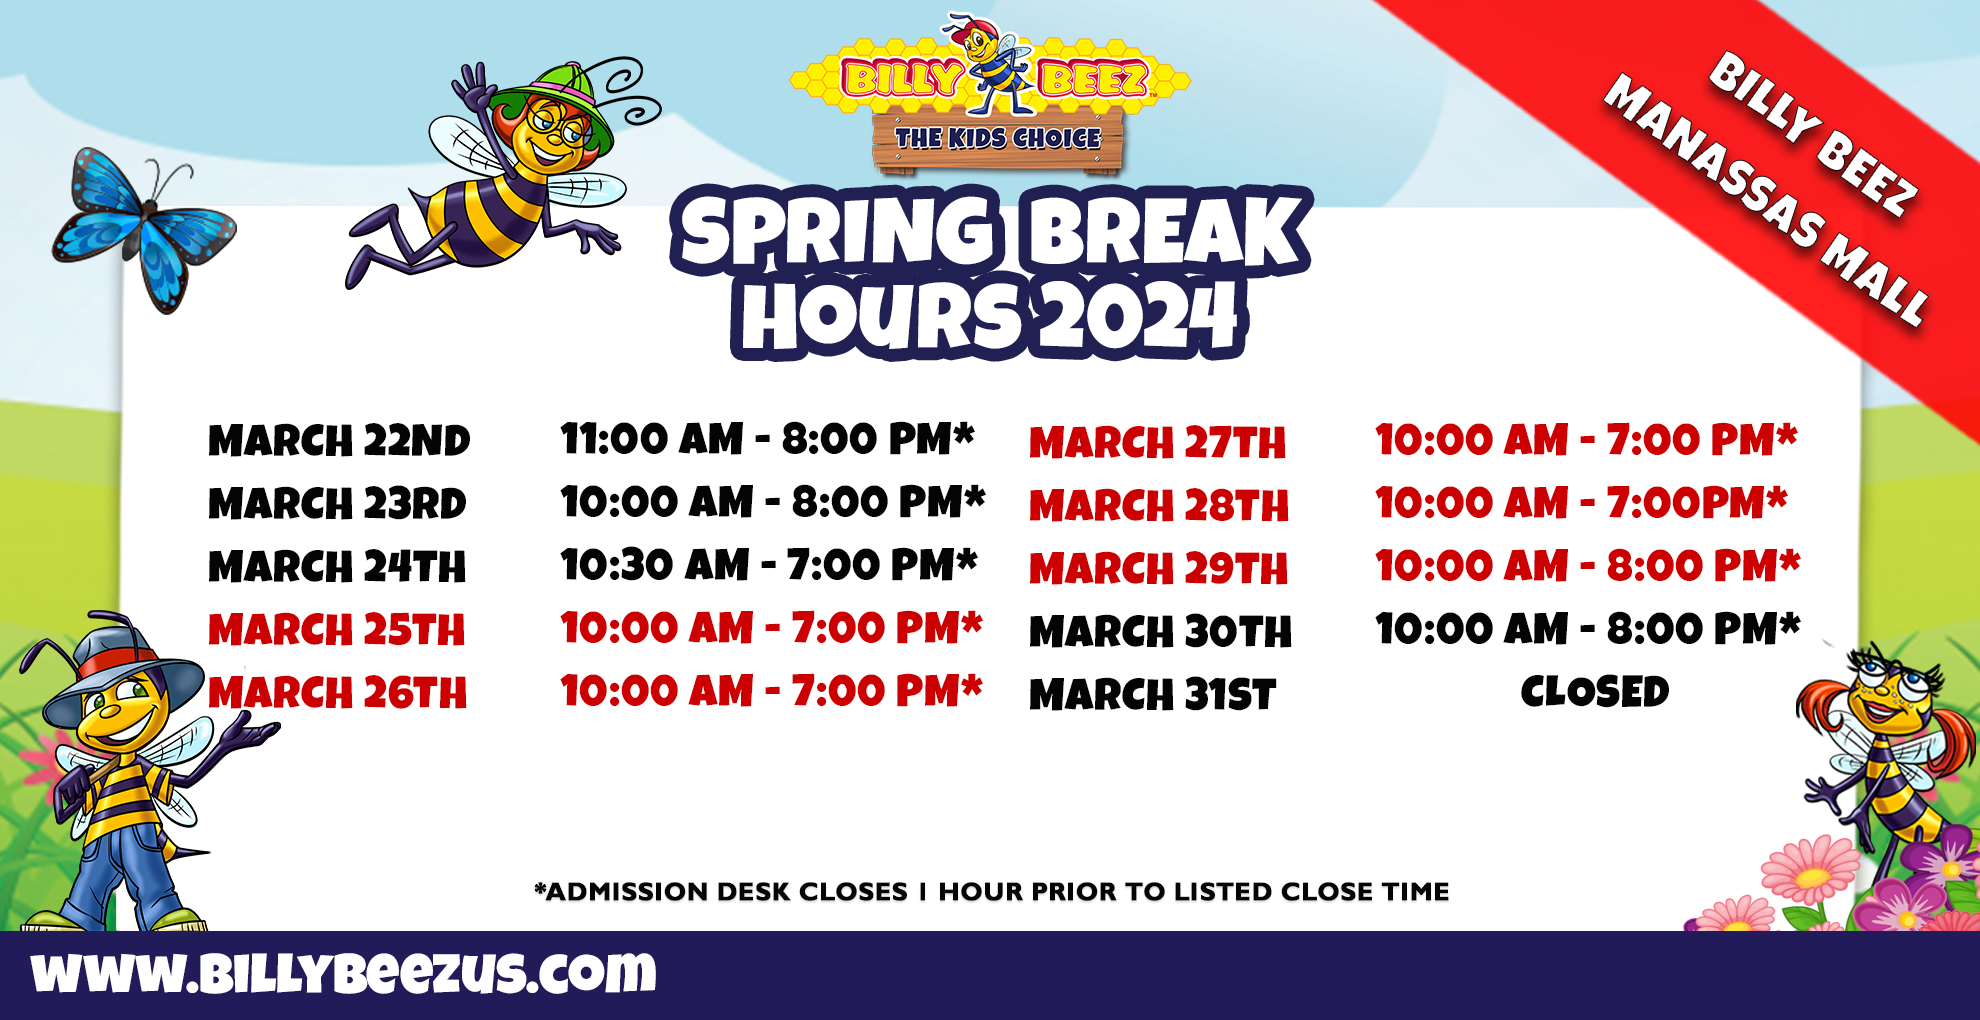 Billy Beez The Kids Choice Billy Beez Manassas Mall Spring Break Hours 2024 March 22nd 11:00 AM - 8:00 PM* March 23rd 10:00 AM - 8:00 PM* March 24th 10:30 AM - 7:00 PM* March 25th 10:00 AM - 7:00 PM* March 26th 10:00 AM - 7:00 PM* March 27th 10:00 AM - 7:00 PM* March 28th 10:00 AM - 7:00 PM* March 29th 10:00 AM - 8:00 PM* March 30th 10:00 AM - 8:00 PM* March 31st CLOSED